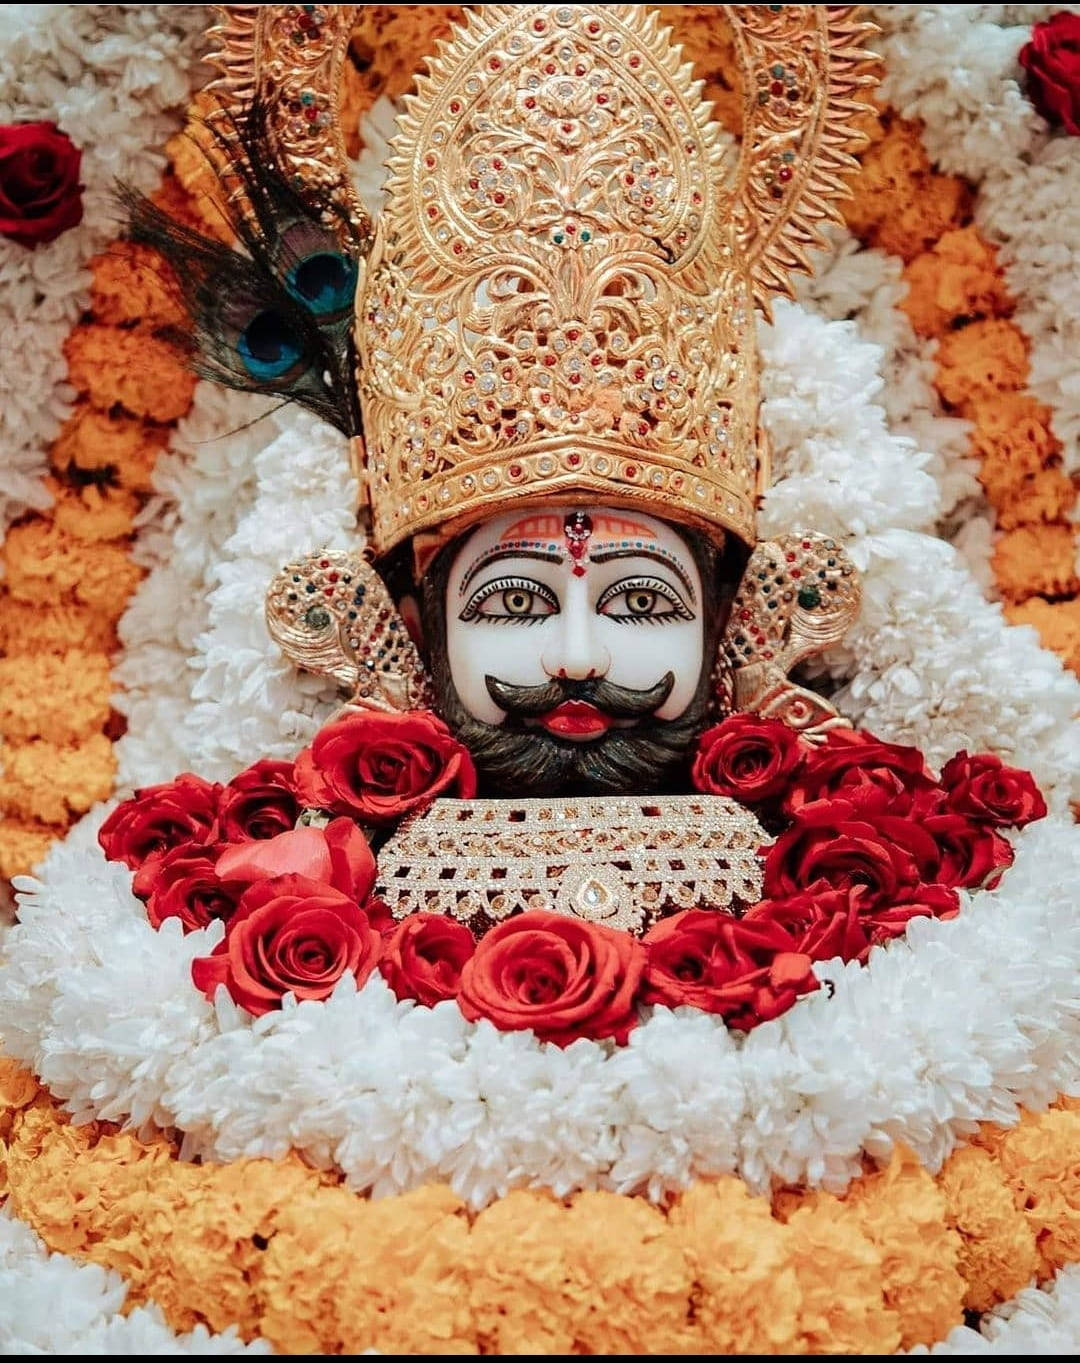 Vitthal Hindu God With Colourful Flowers